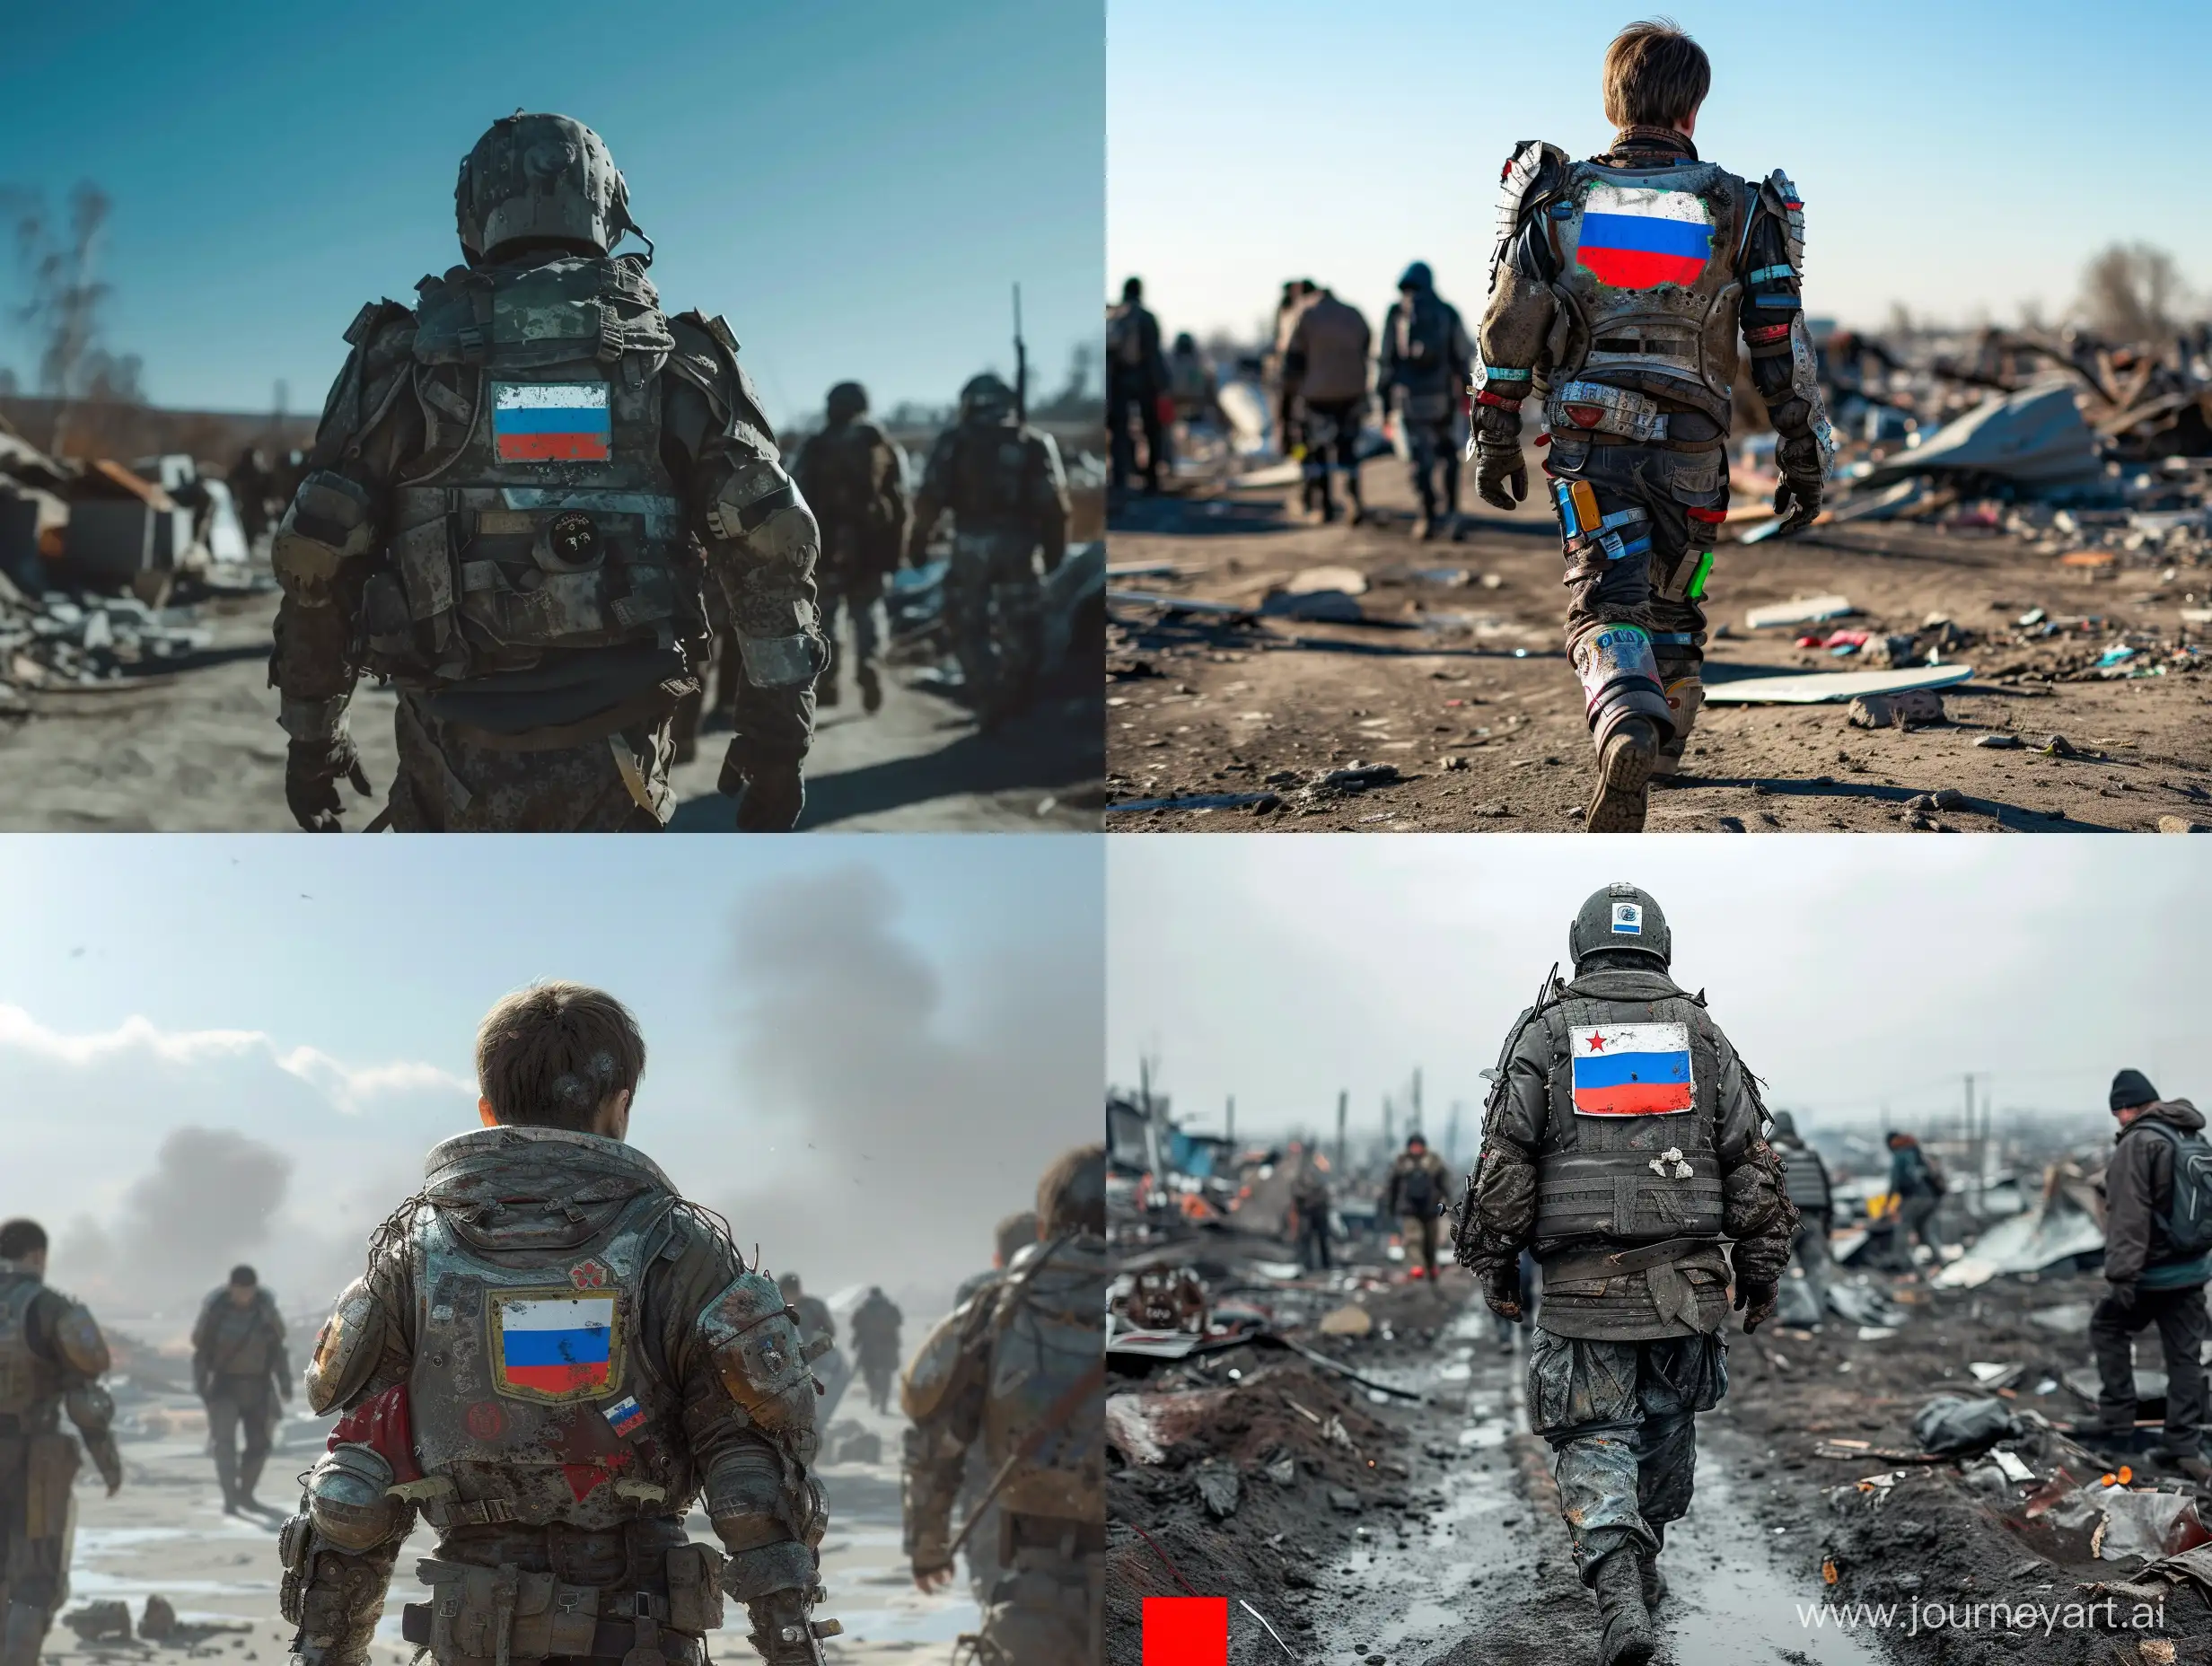 PostApocalyptic-Russian-FlagBearer-Leading-Makeshift-Armored-Survivors